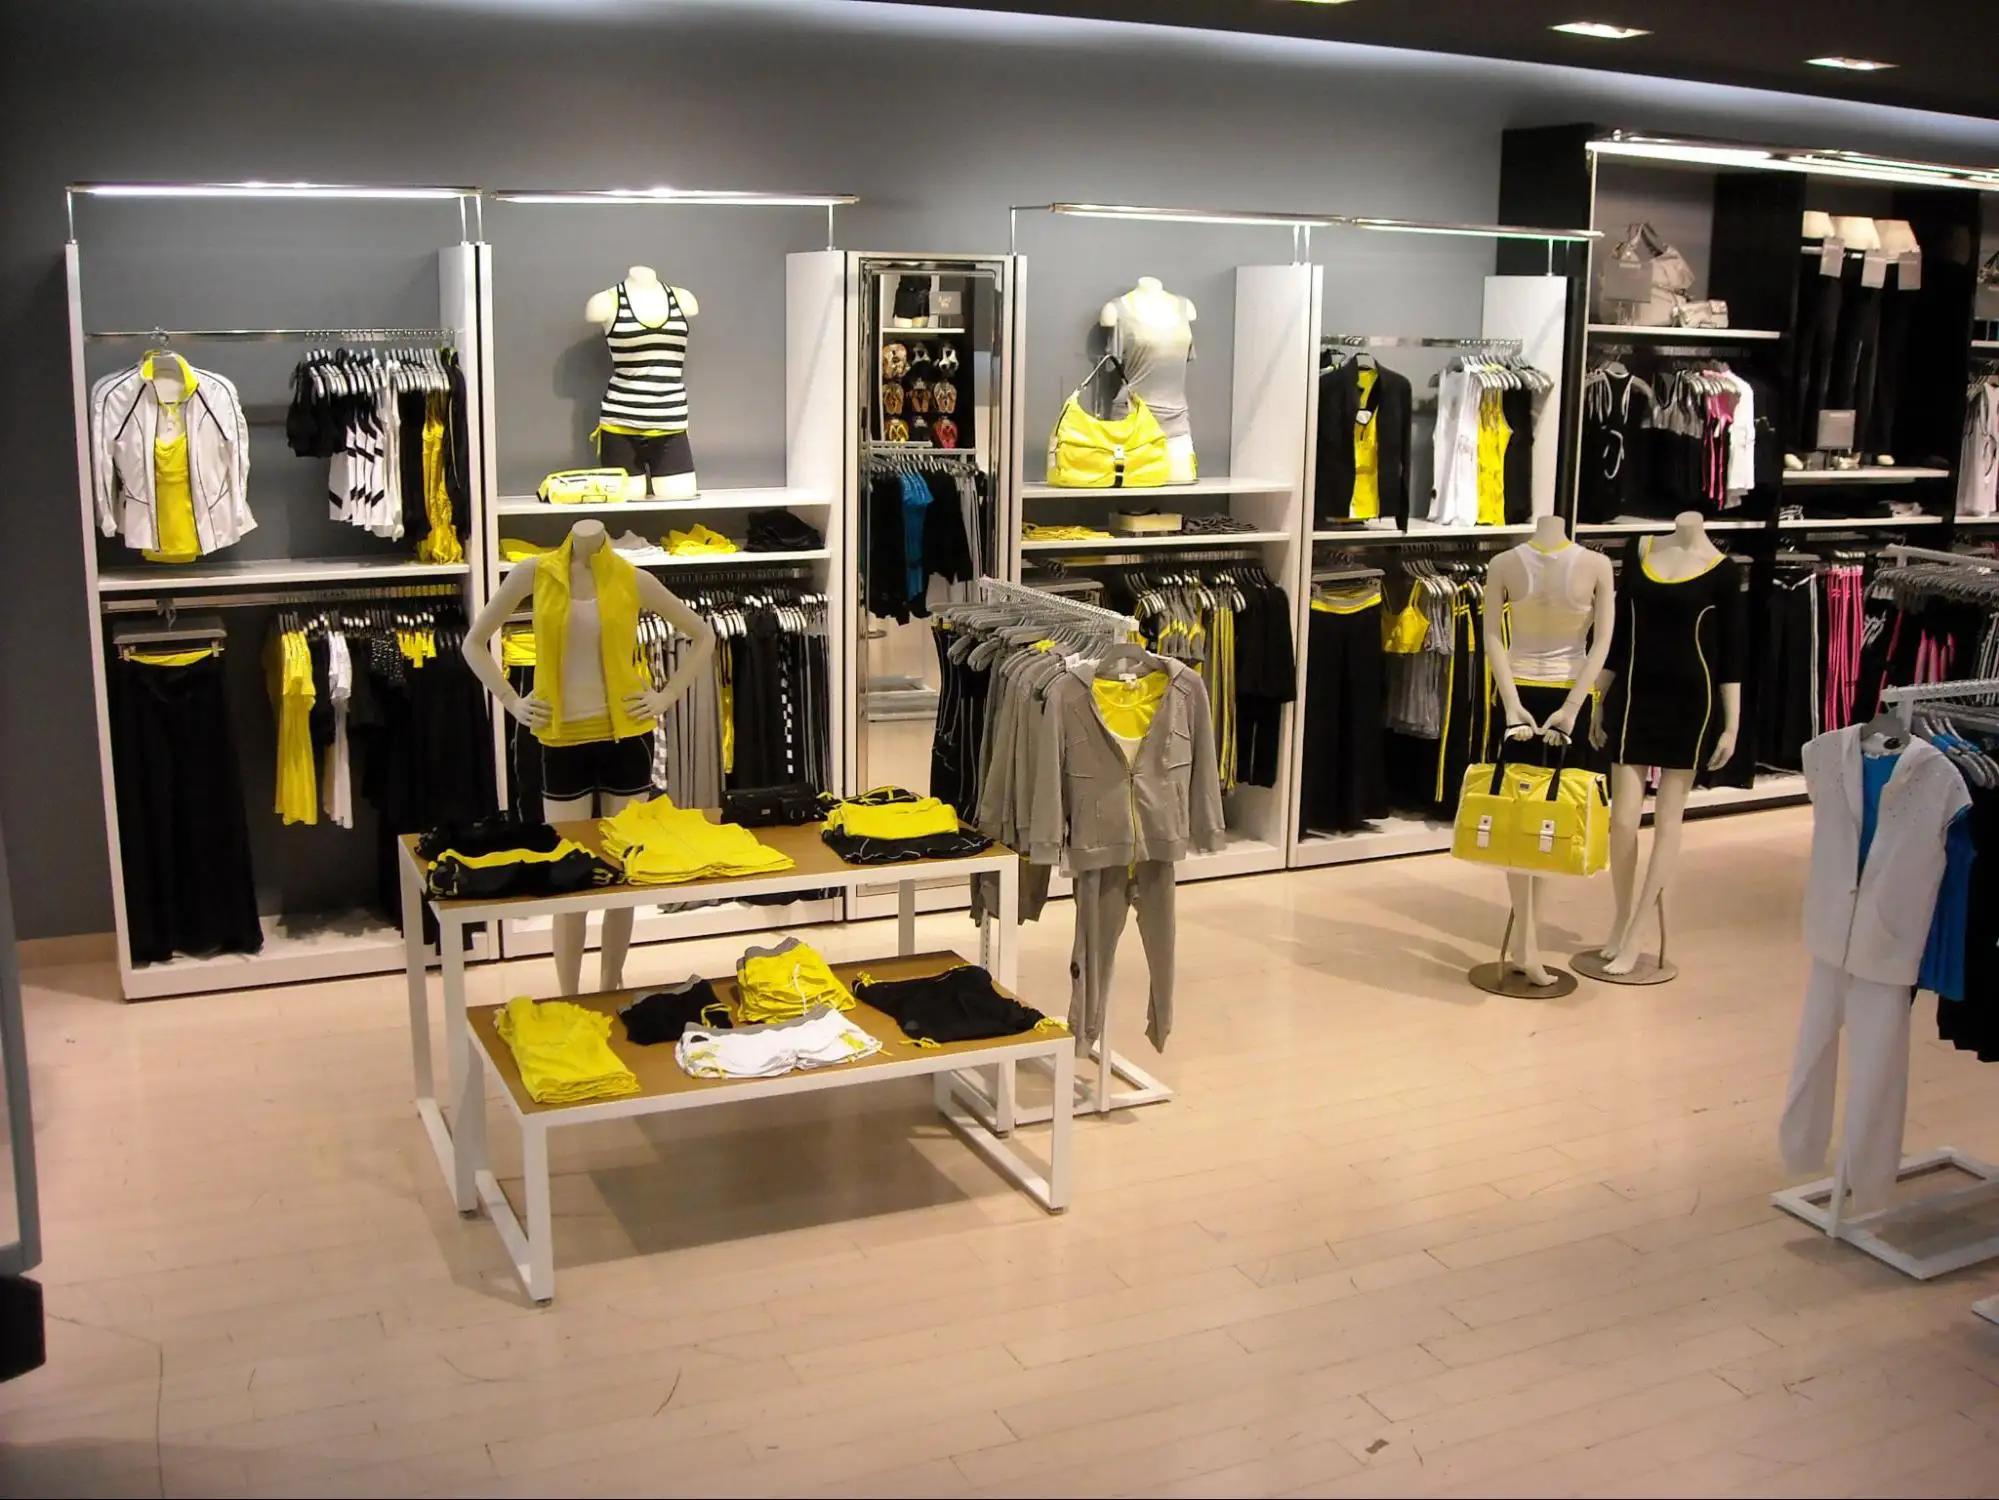 5 Most Important Elements of Visual Merchandising